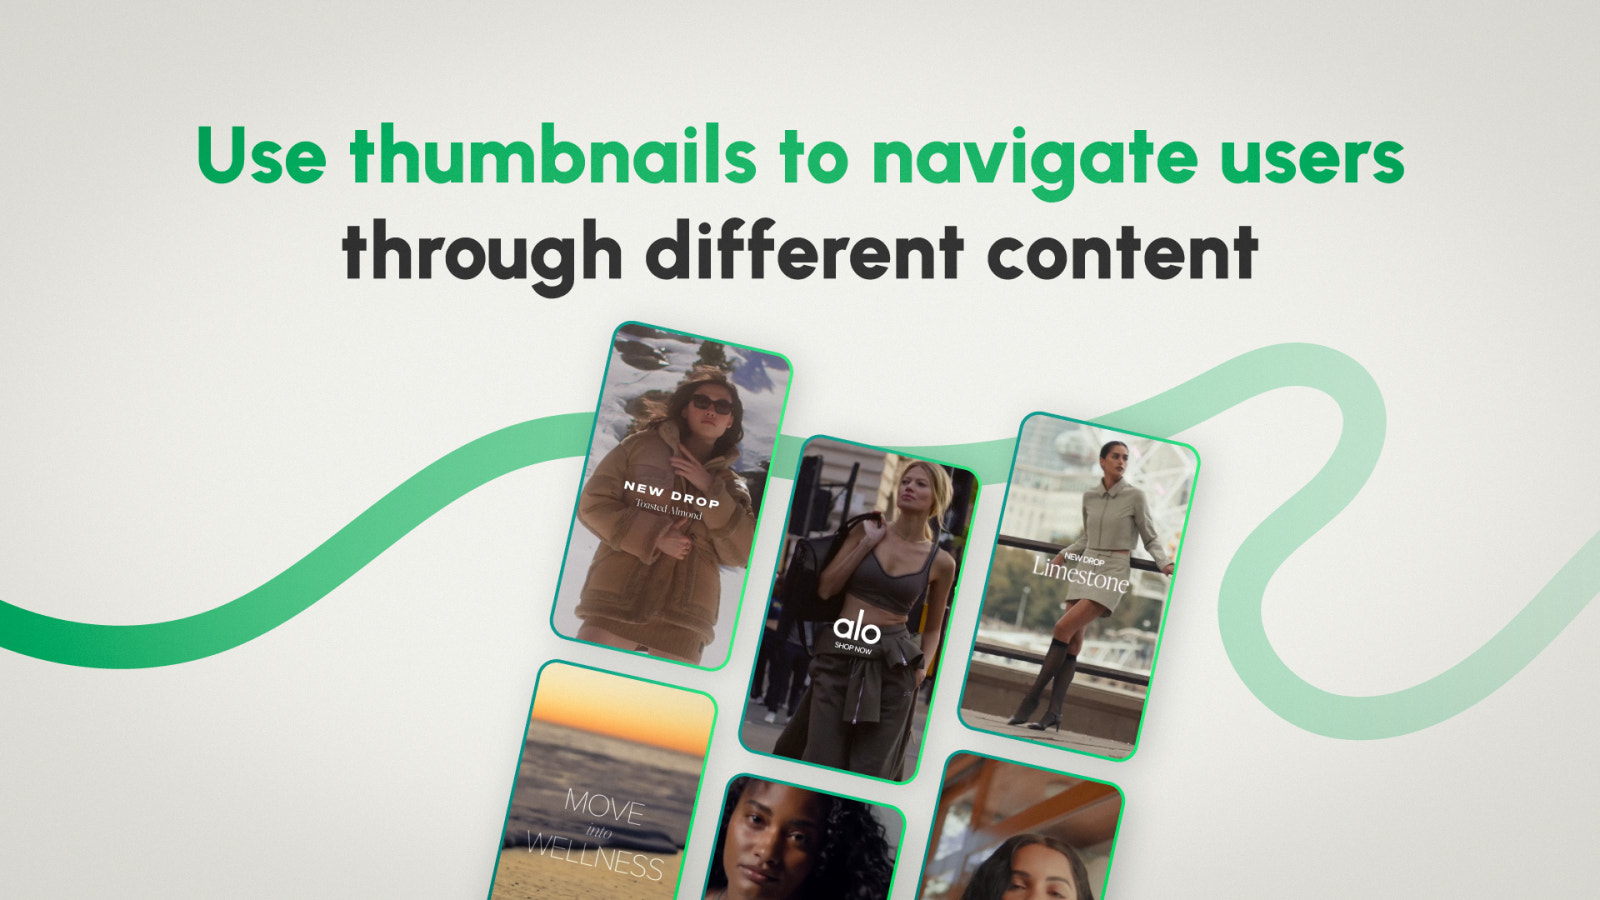 Use thumbnails to navigate users through different content